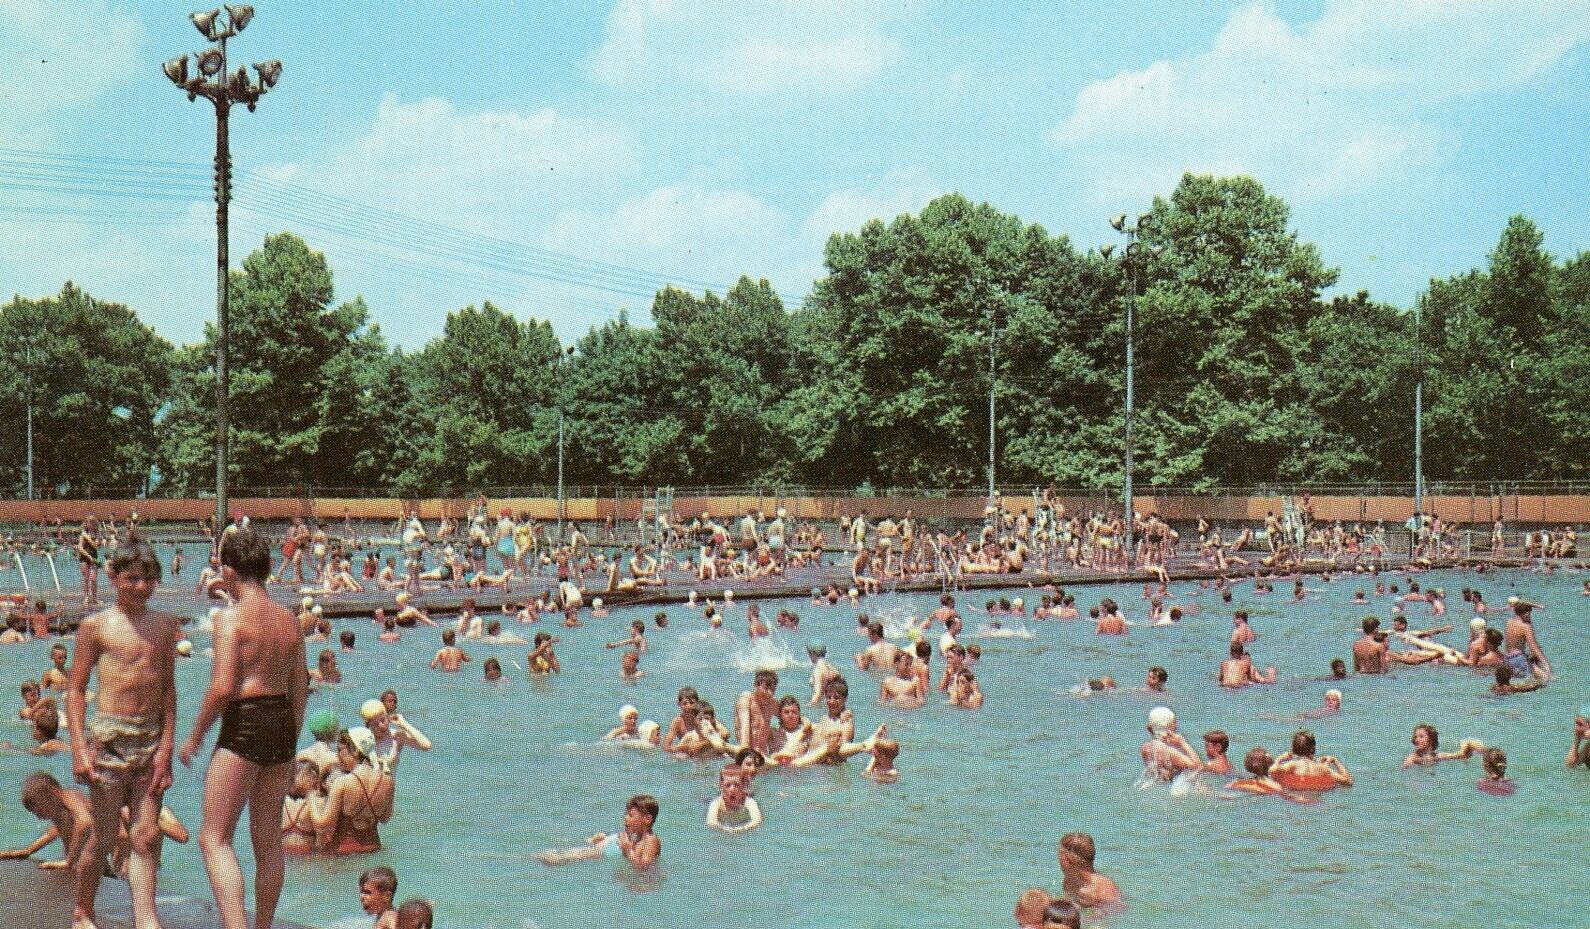 Pittsburgh, PA - Highland Park Swimming Pool - 1960s